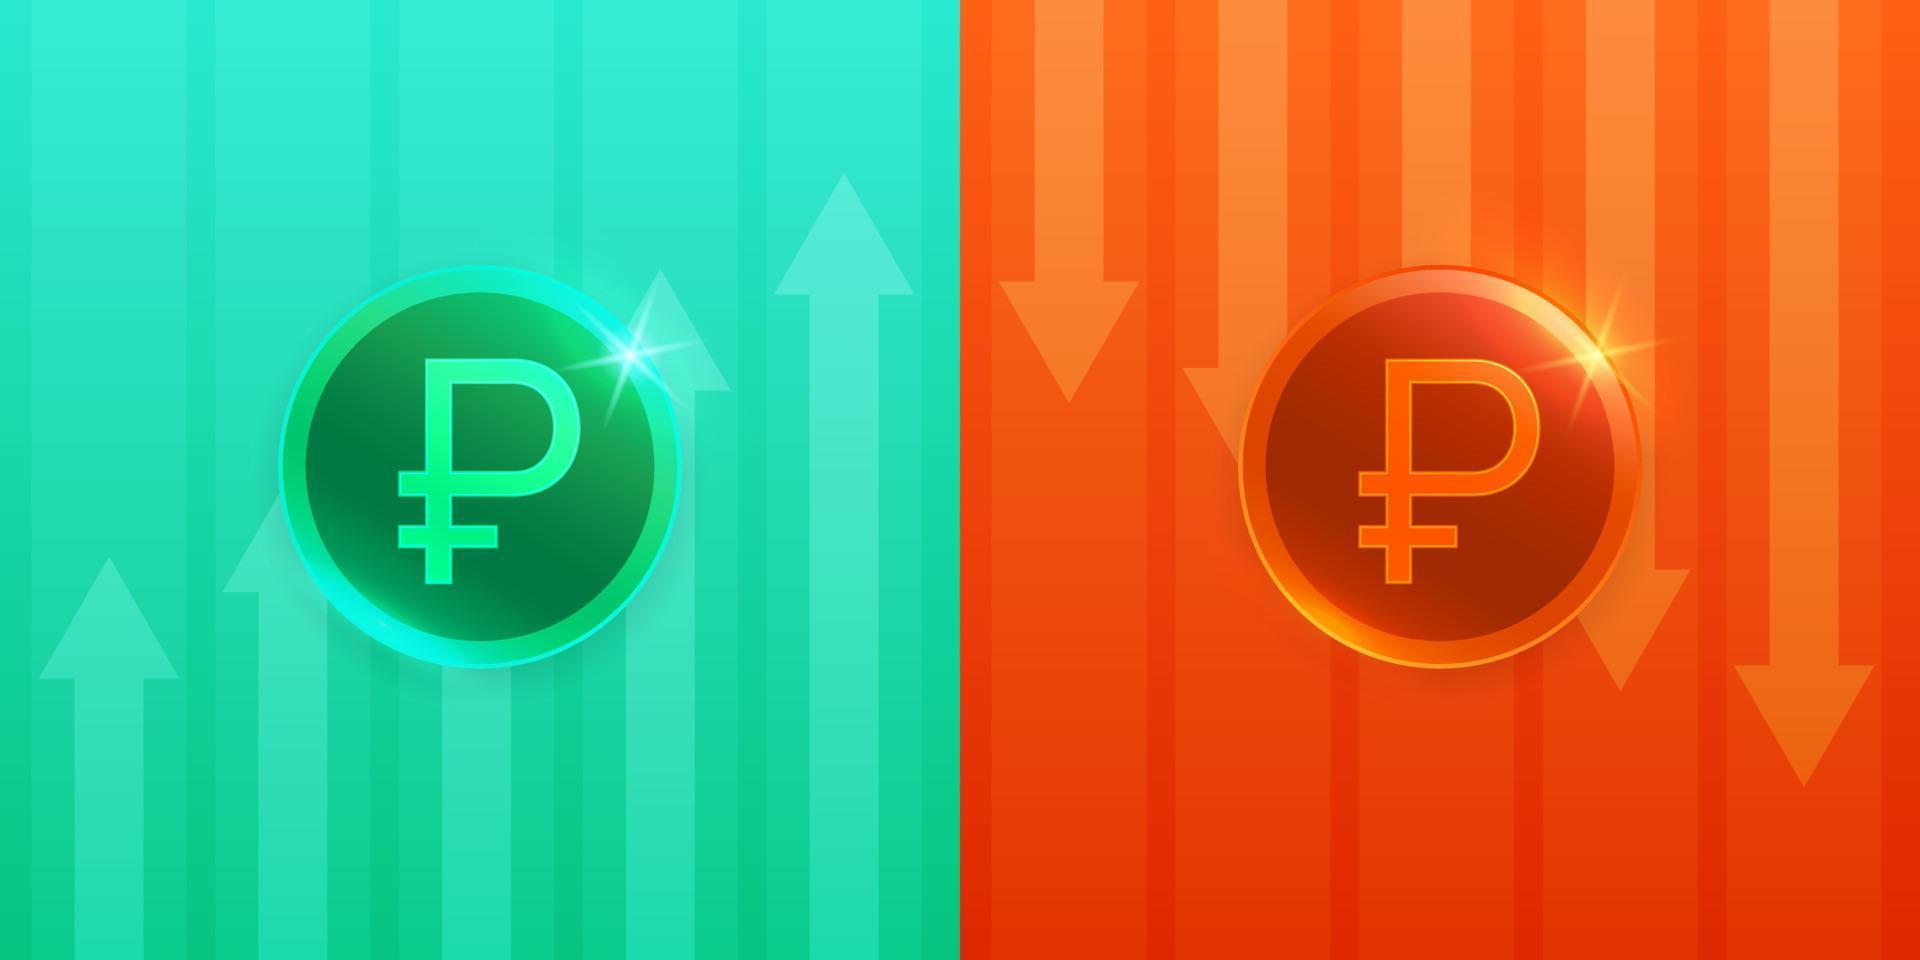 Cost russian ruble up and down sign with arrow. vector